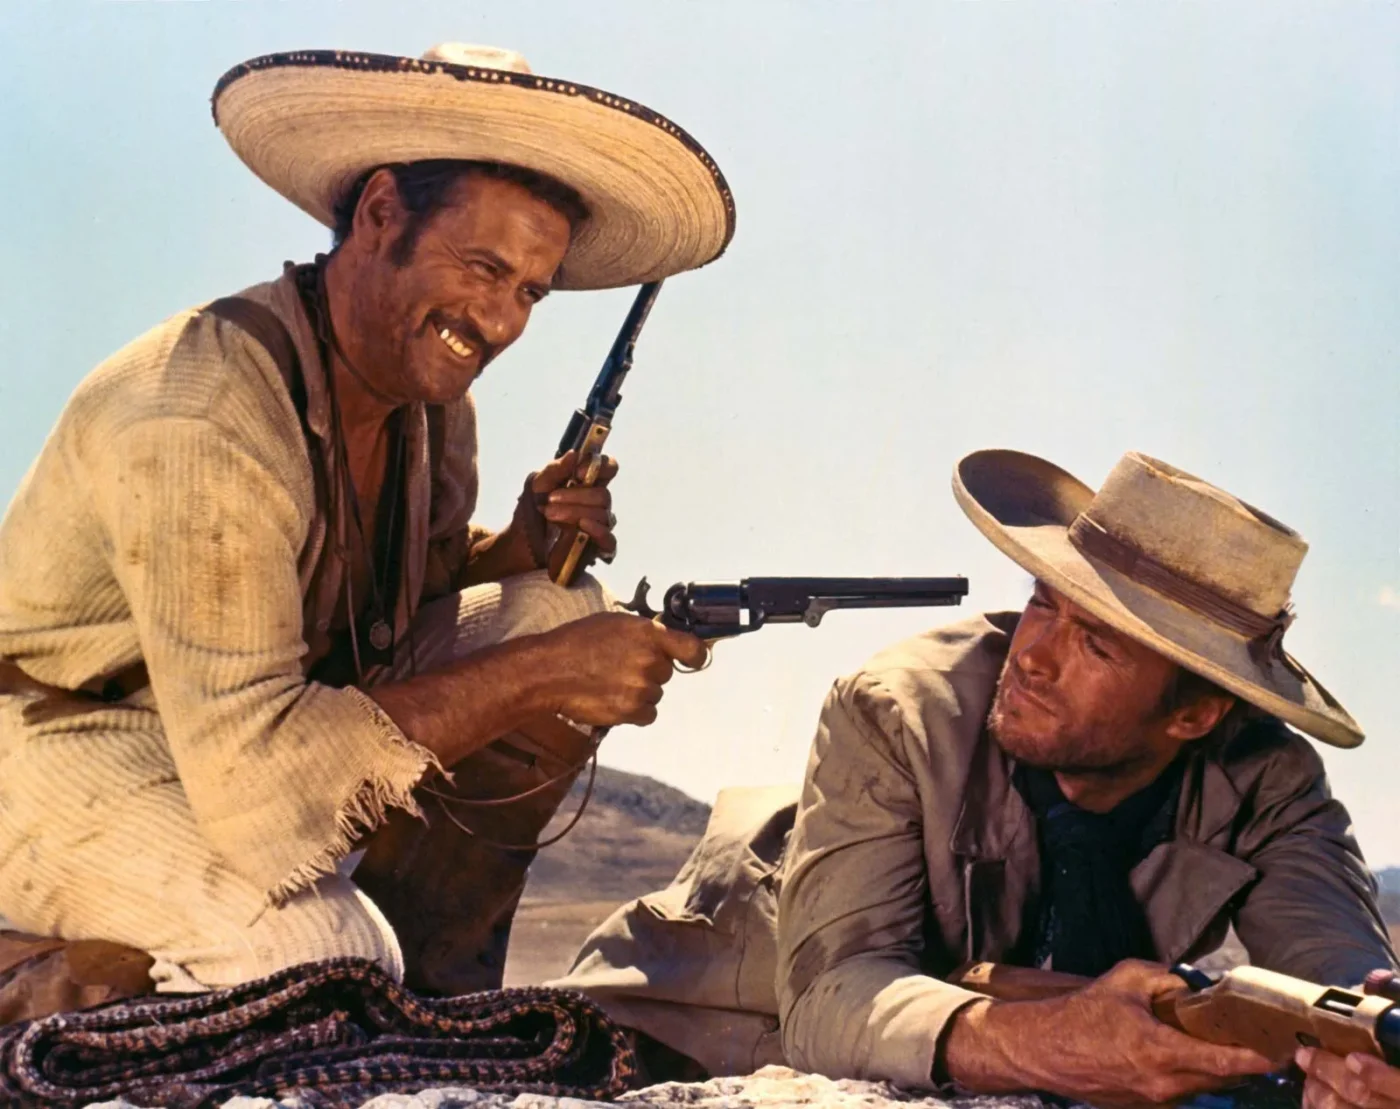 a scene from The Good, the Bad and the Ugly where a man in a hat playfully holds a gun towards Clint Eastwood lying down with a gun poised to the front